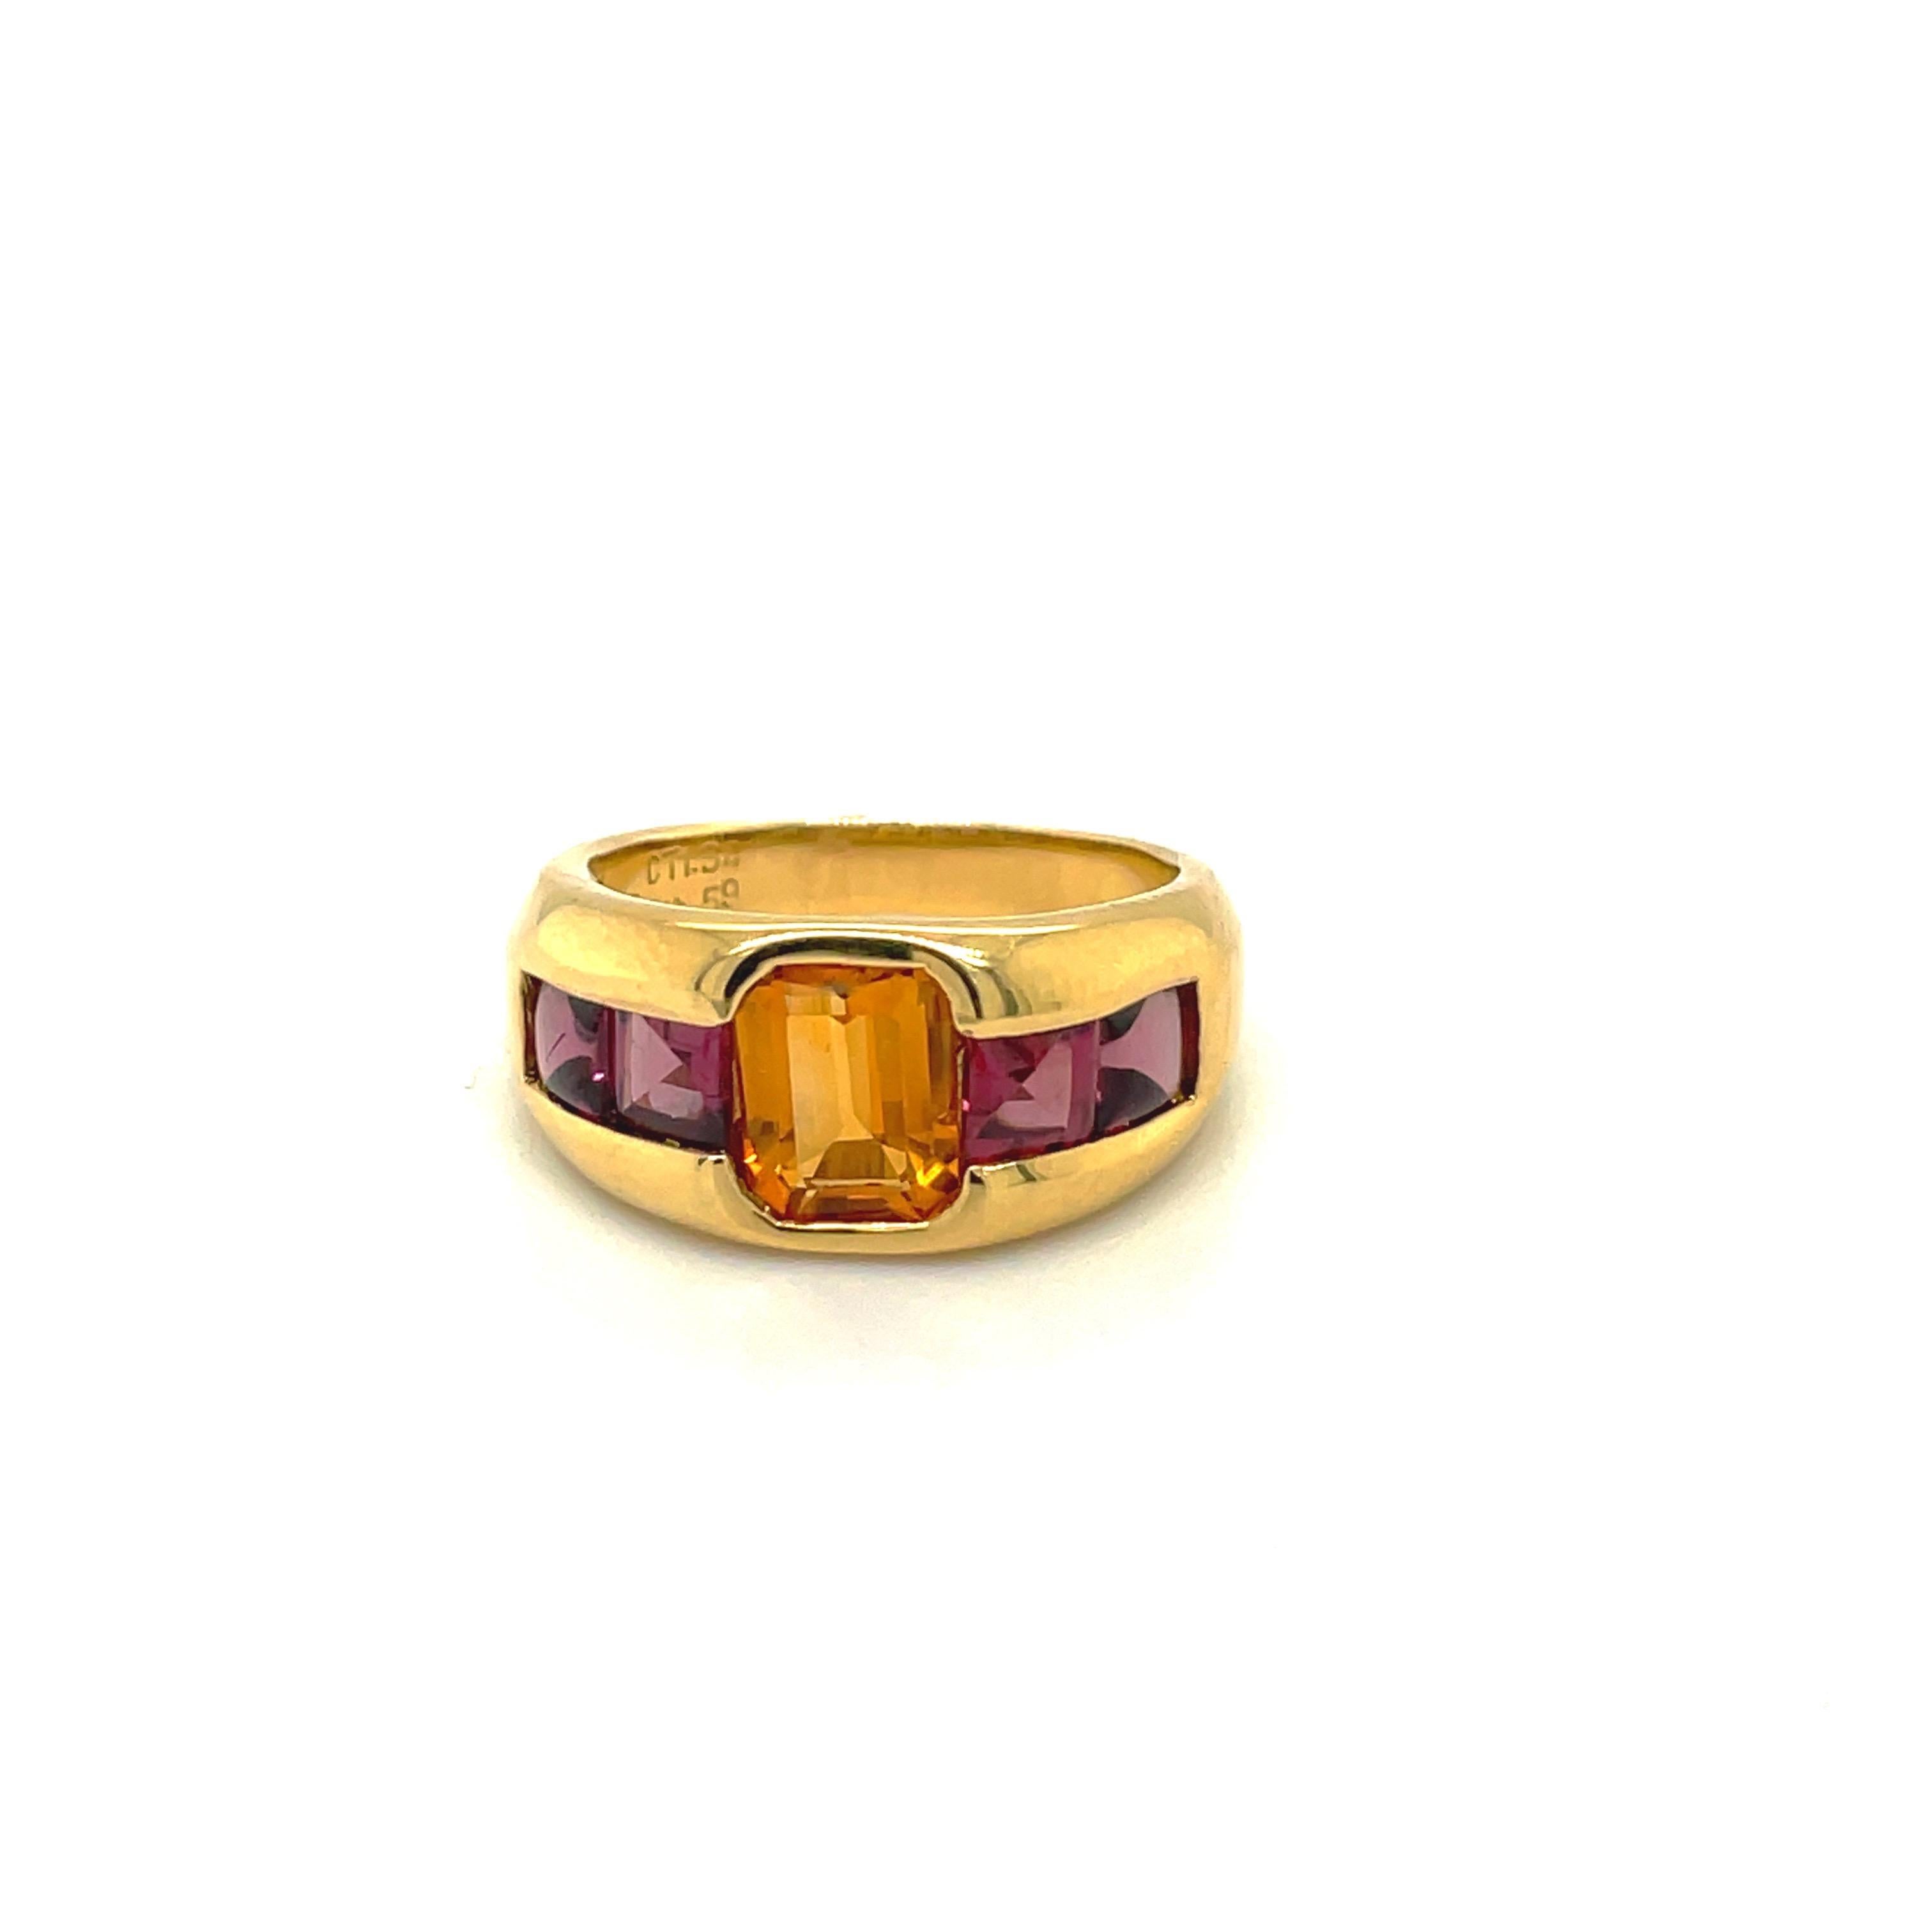 Gregg Ruth 18KT Yellow Gold Ring with 1.34Ct. Citrine Center & 1.59Ct. Rhodolite For Sale 6